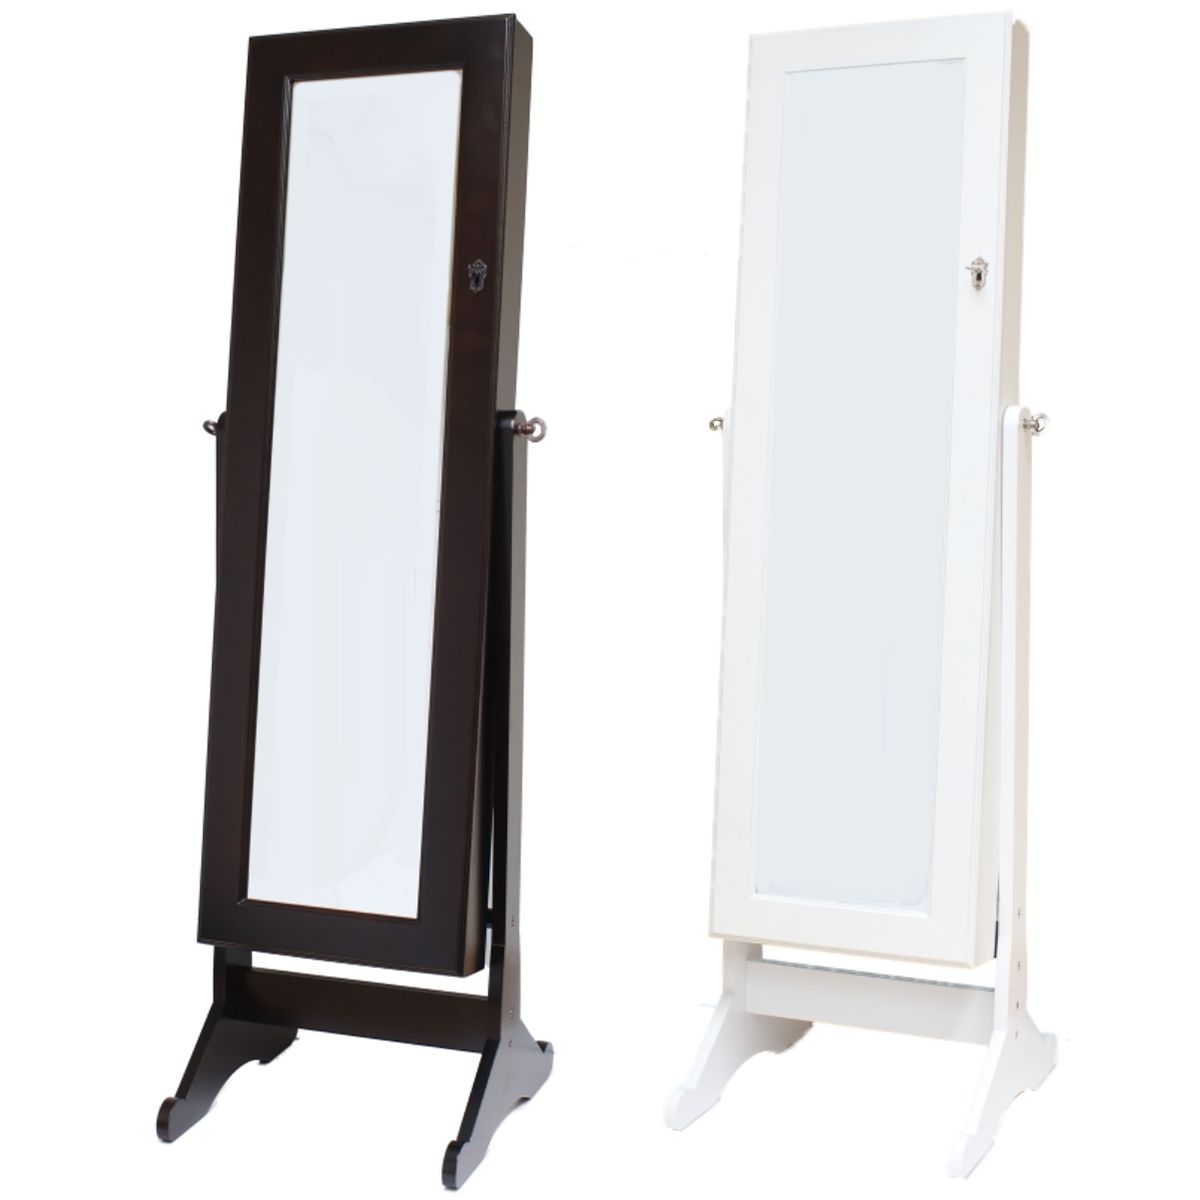 Large Floor Standing Bedroom Mirror Jewellery Boxcabinet With Full Length Stand Alone Mirrors (View 9 of 15)